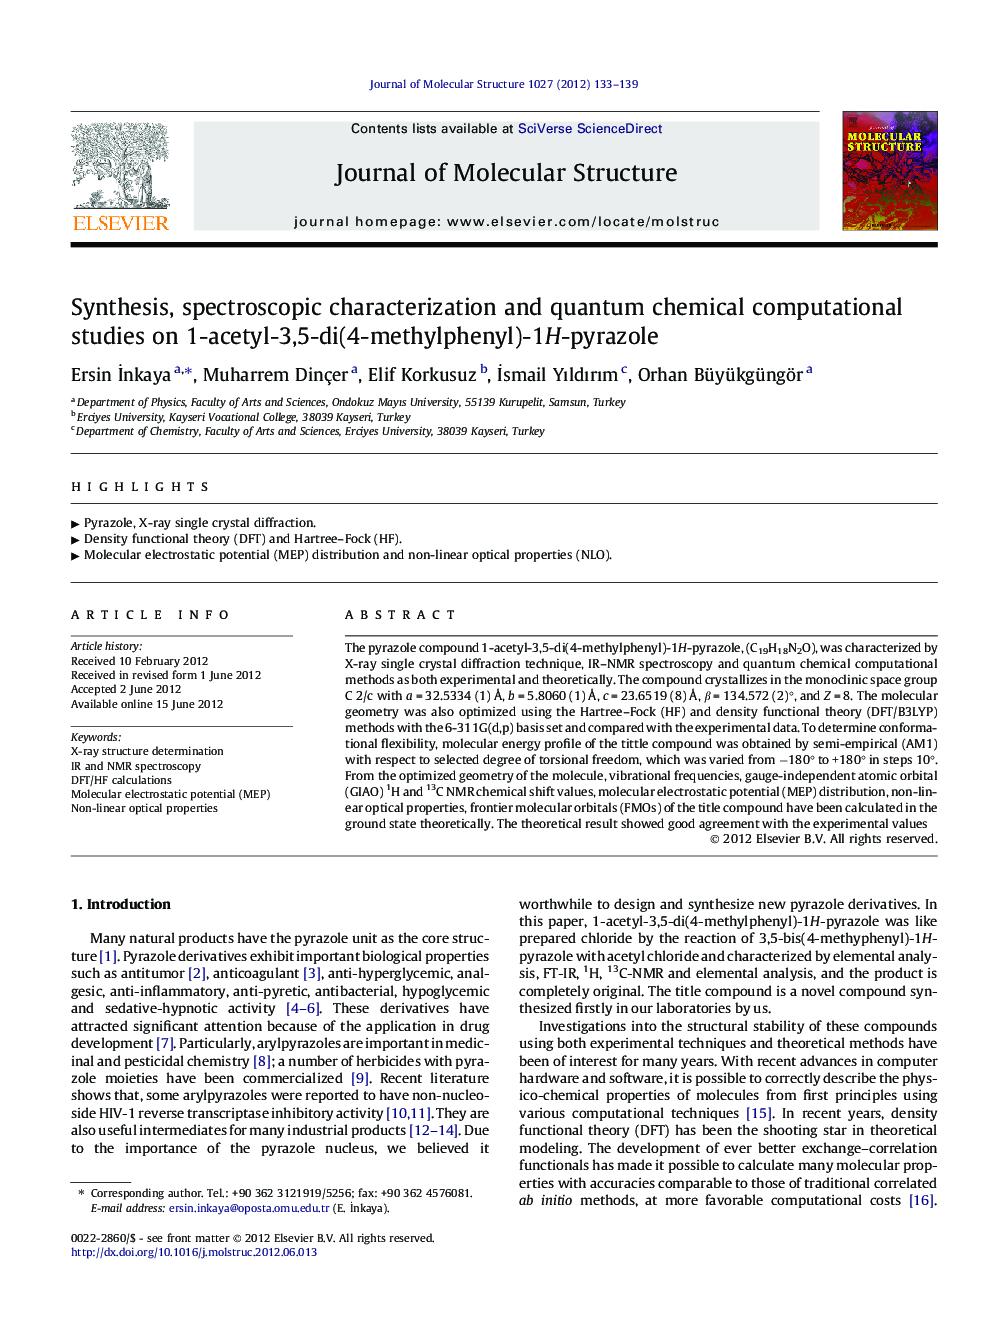 Synthesis, spectroscopic characterization and quantum chemical computational studies on 1-acetyl-3,5-di(4-methylphenyl)-1H-pyrazole